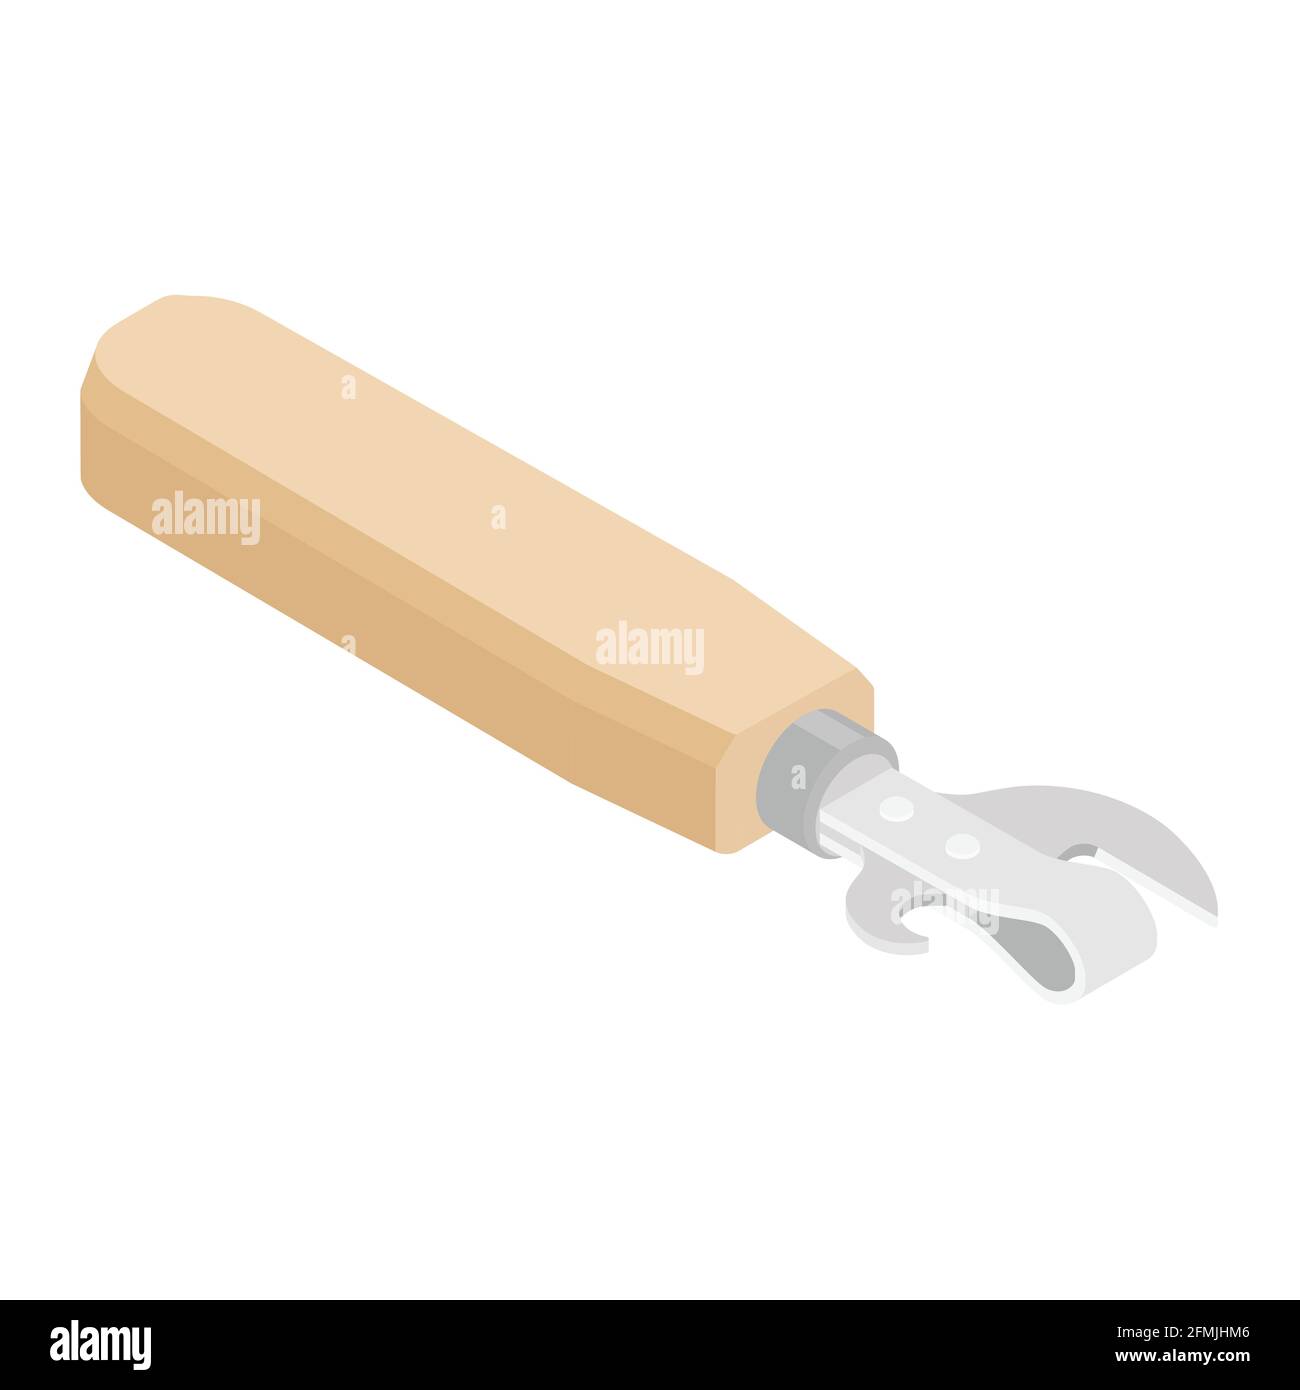 Classic shape can opener isolated on white background. Kitchen appliances. Vector. Isometric view Stock Vector